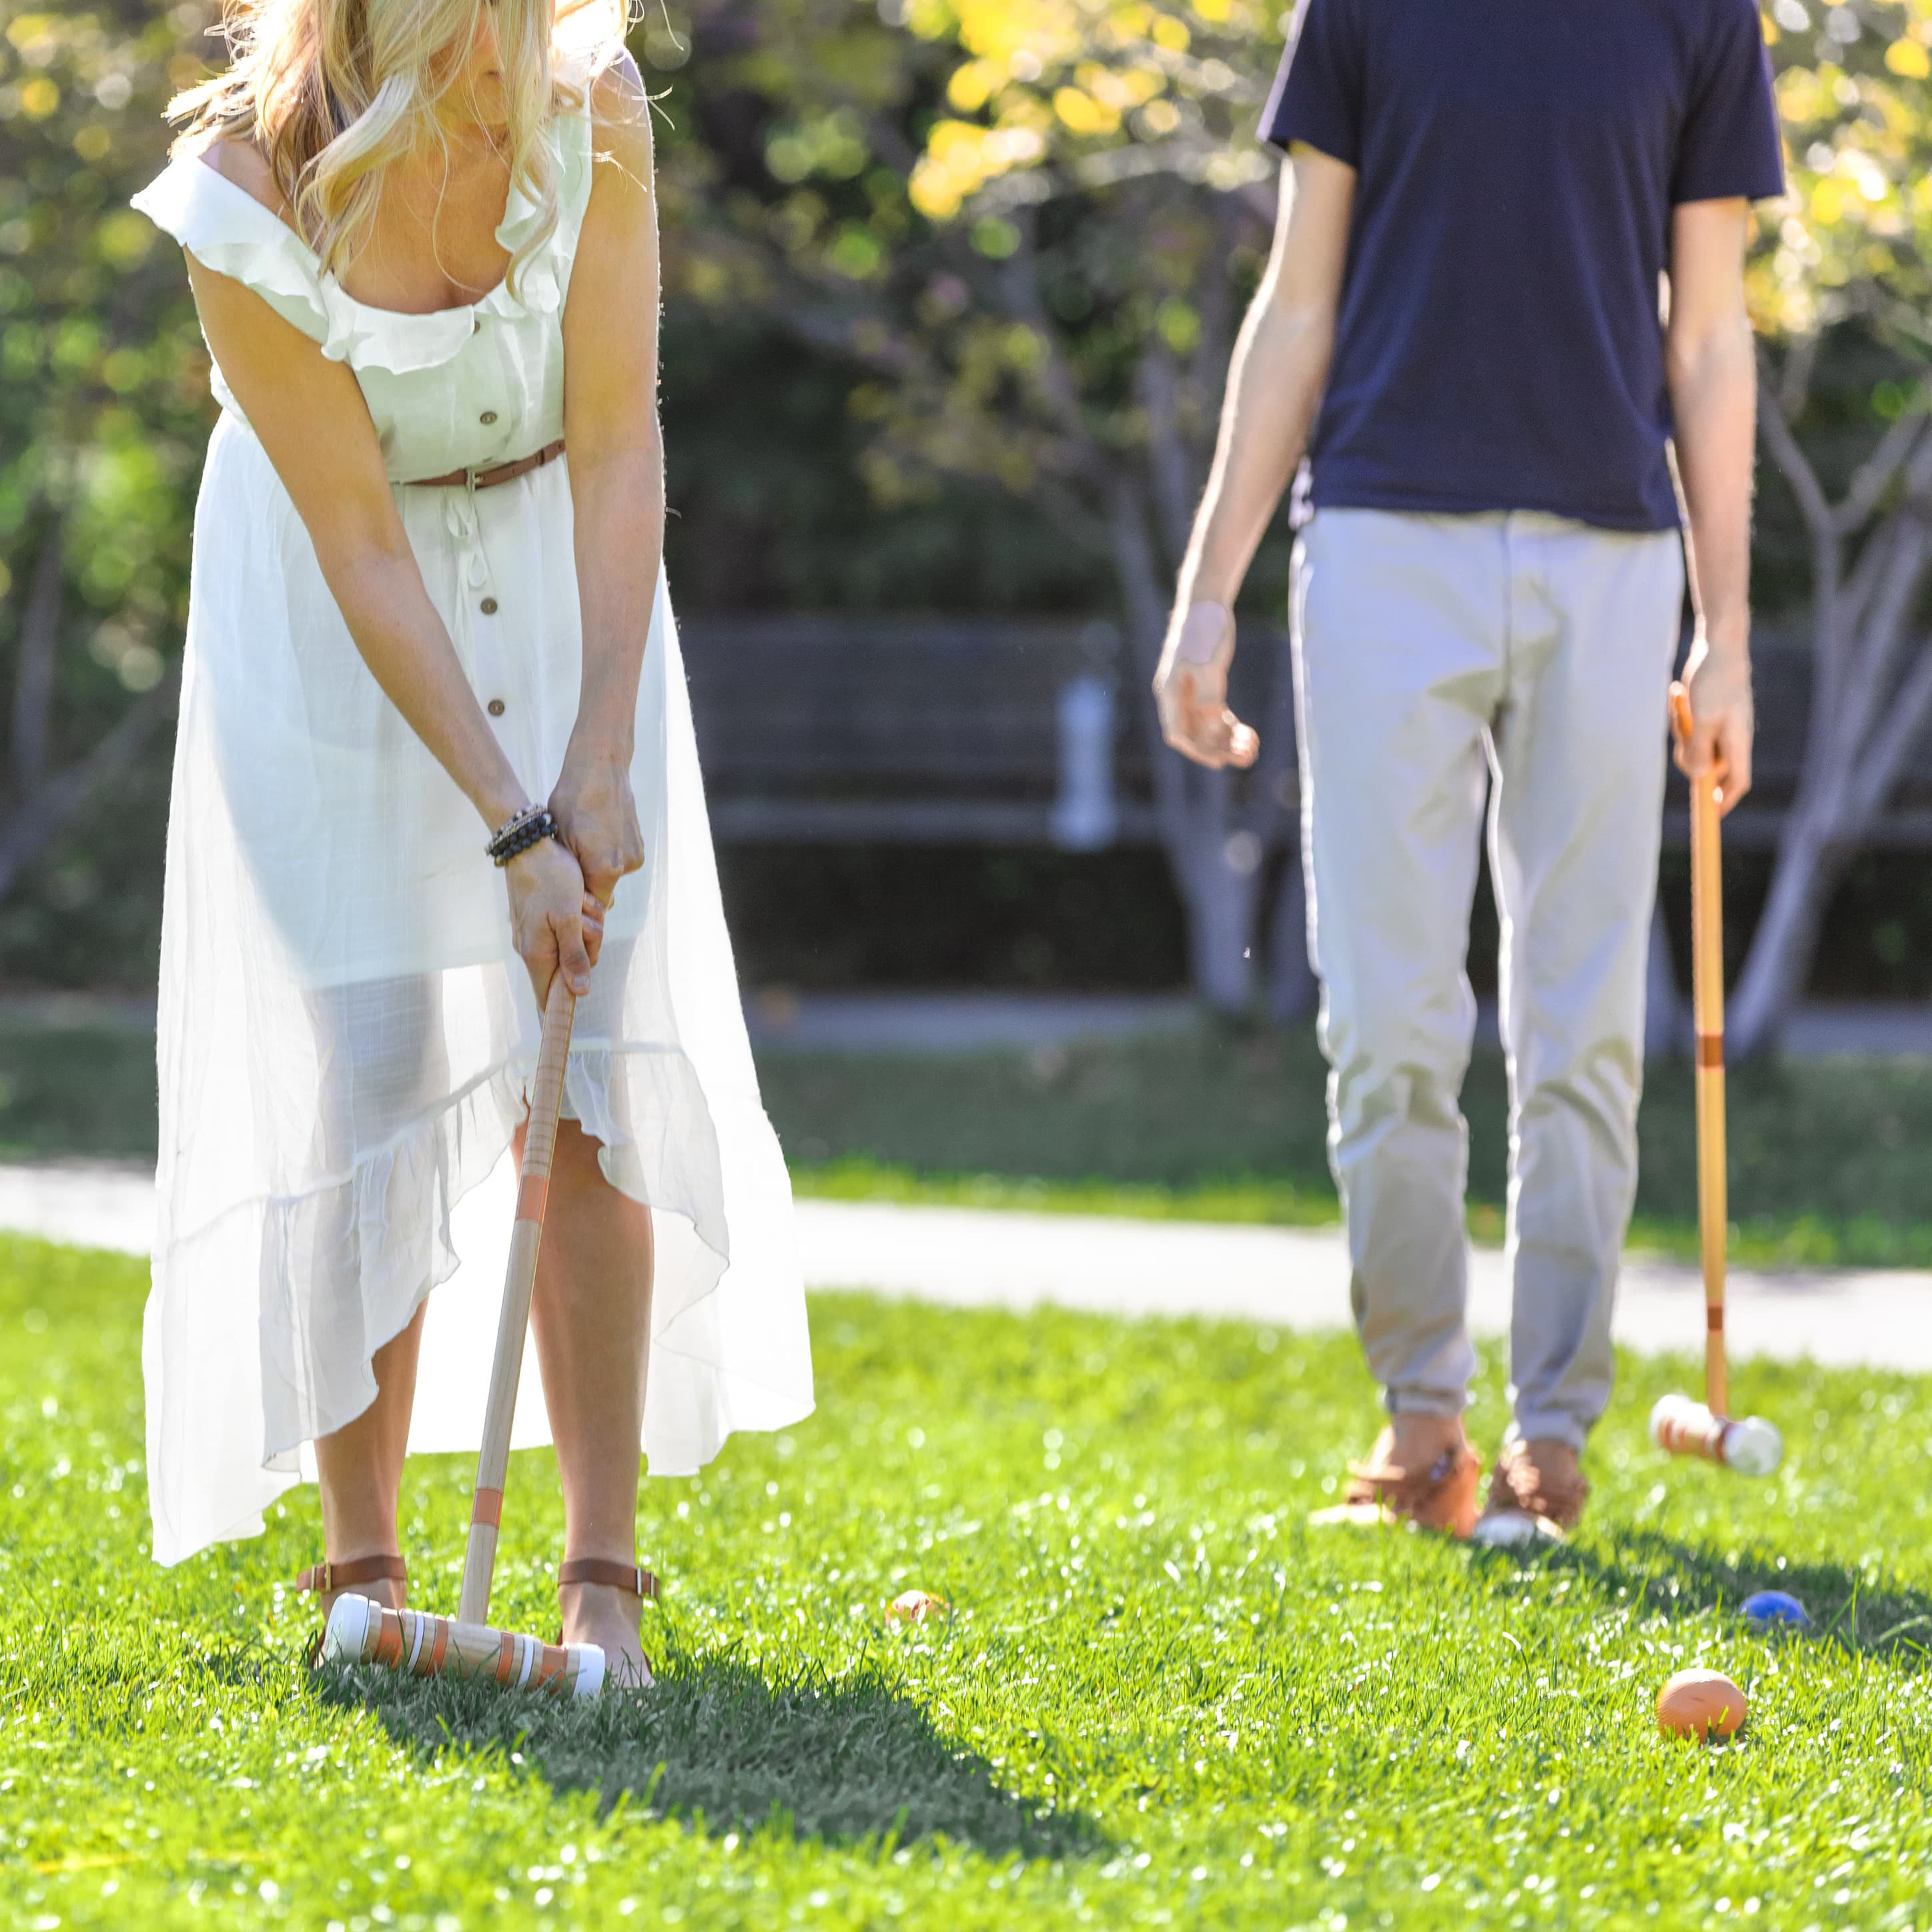 Classic Croquet Set for up-to 6 Players – Sportcraft Canada